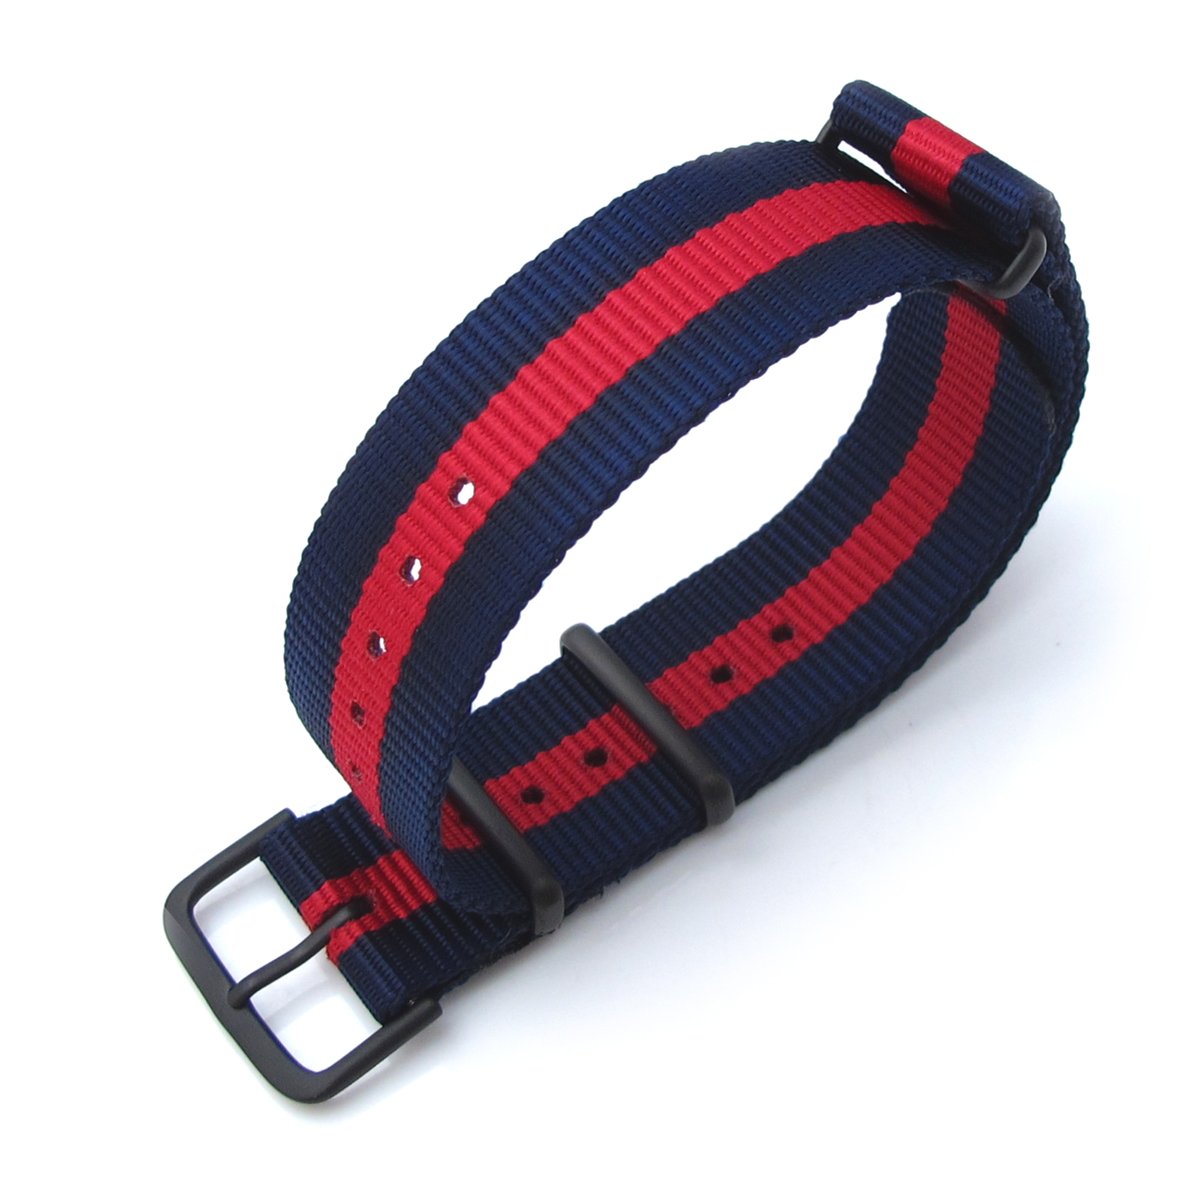 MiLTAT 20mm G10 military watch strap ballistic nylon armband PVD Red &amp; Blue Stripes Strapcode Watch Bands